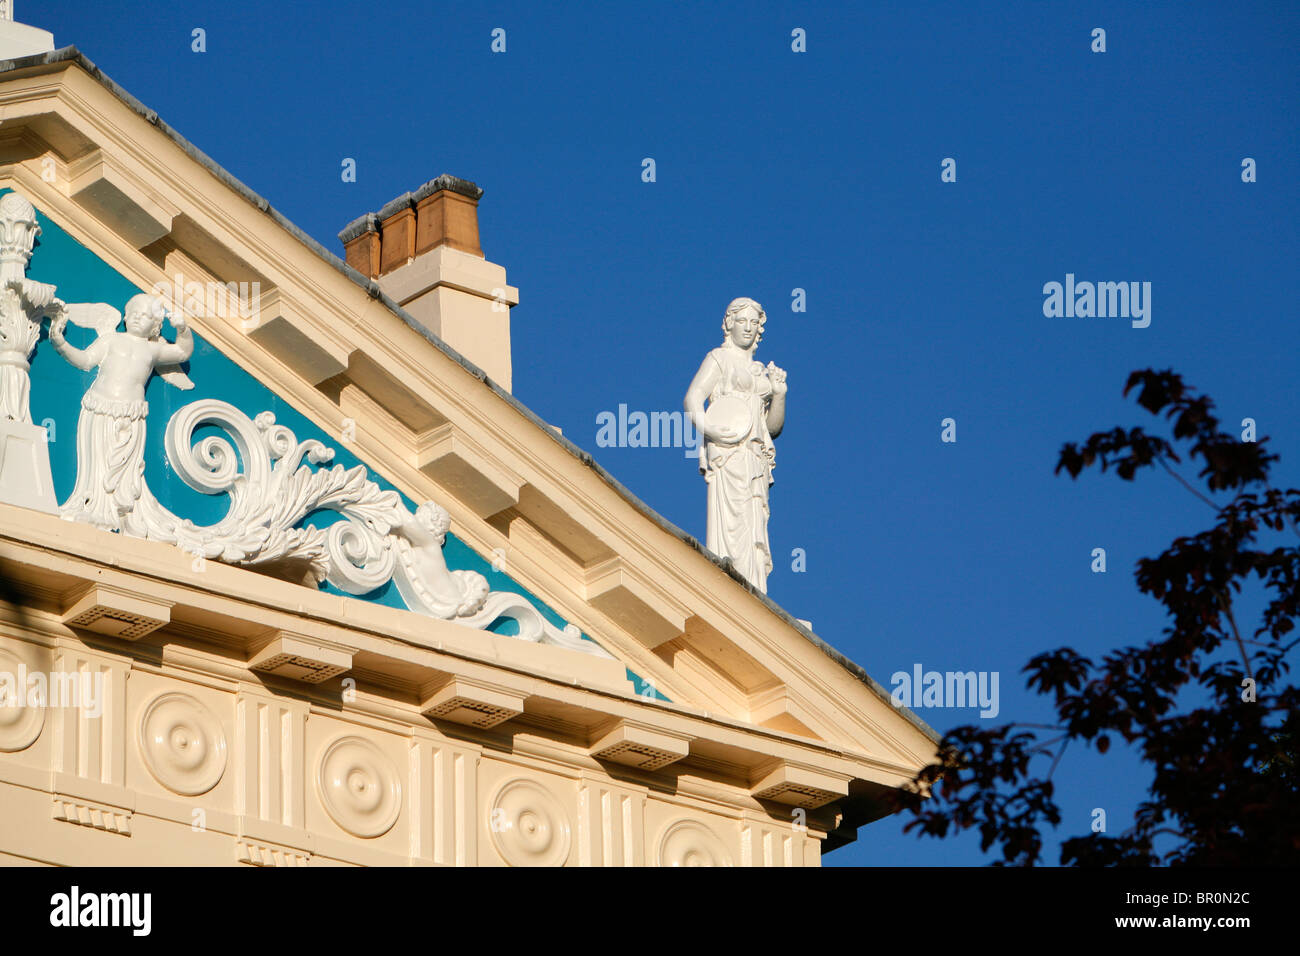 Classical sculpture on top of the pediment of Hanover Terrace, Regent's Park, London, UK Stock Photo